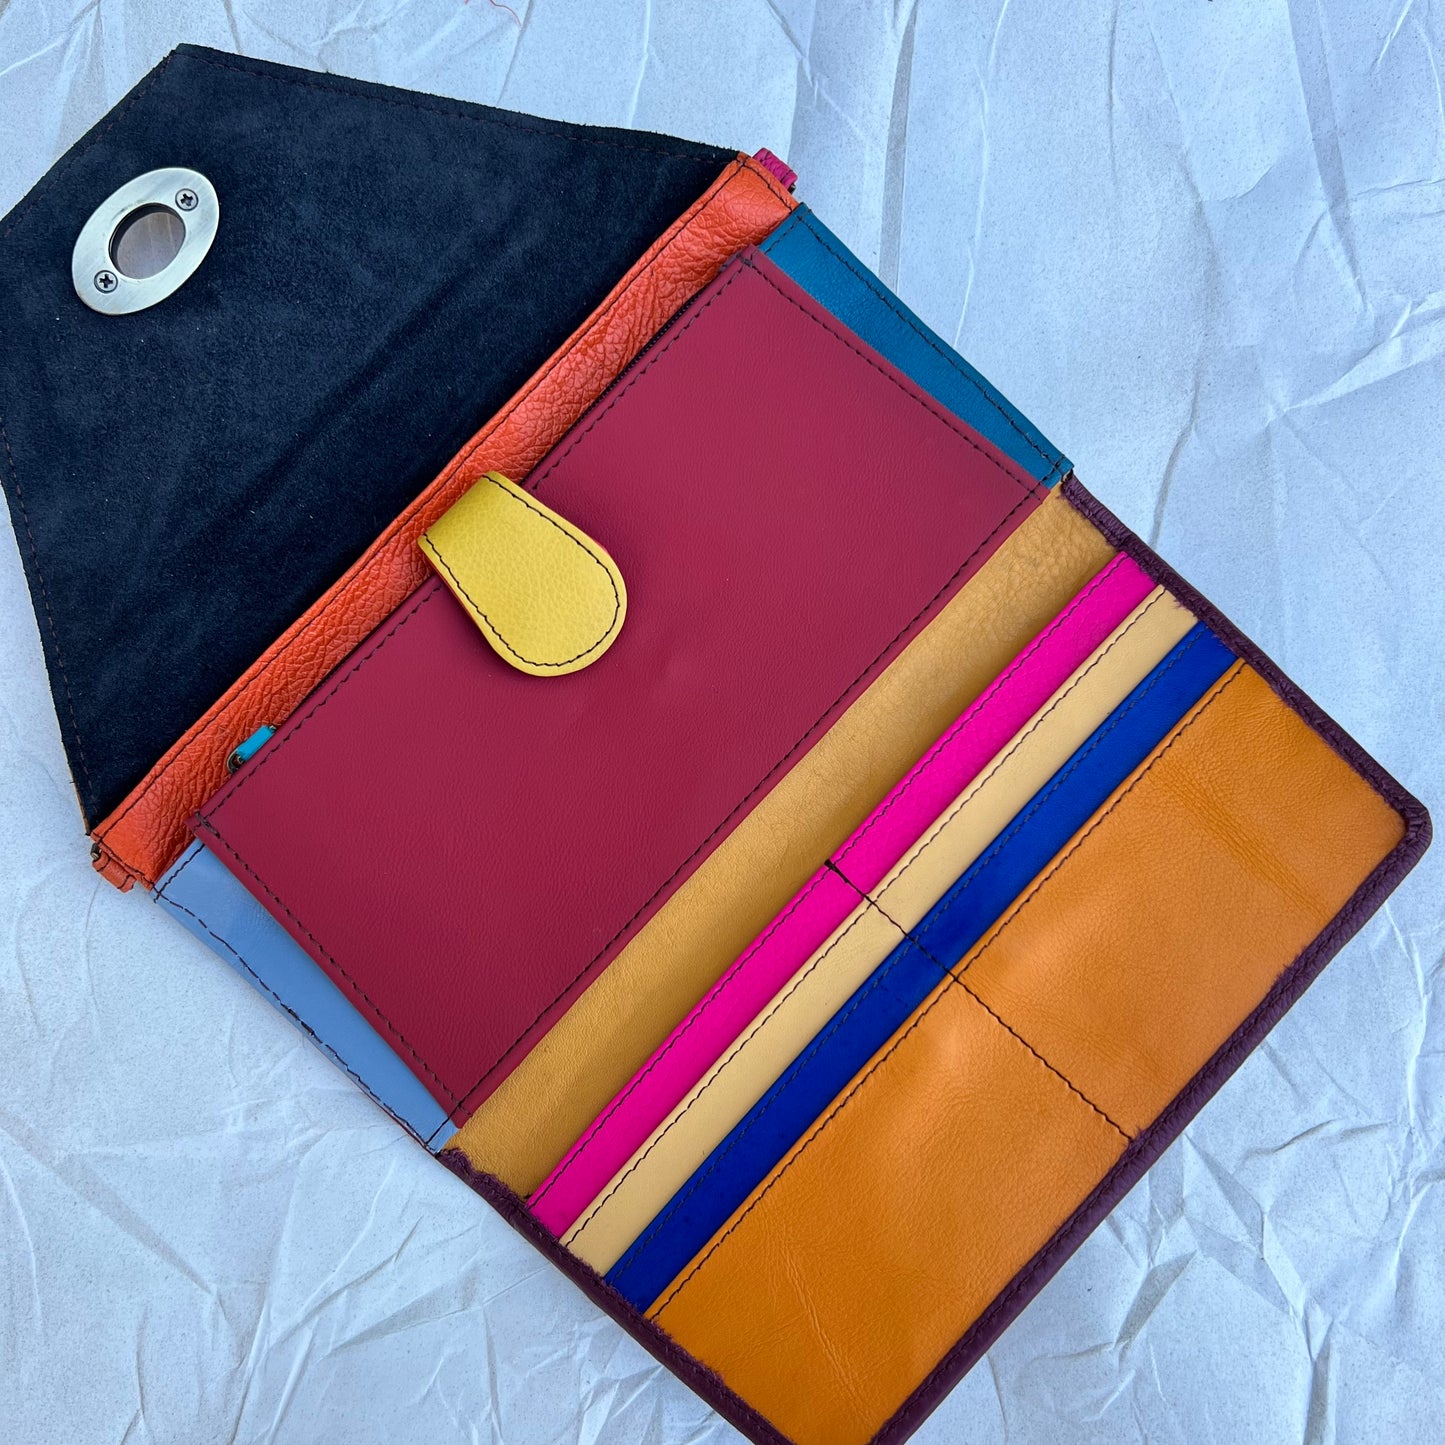 open view of the maroon and mango secret clutch revealing bright colors of fuchsia, yellow, tan, maroon, and blue 